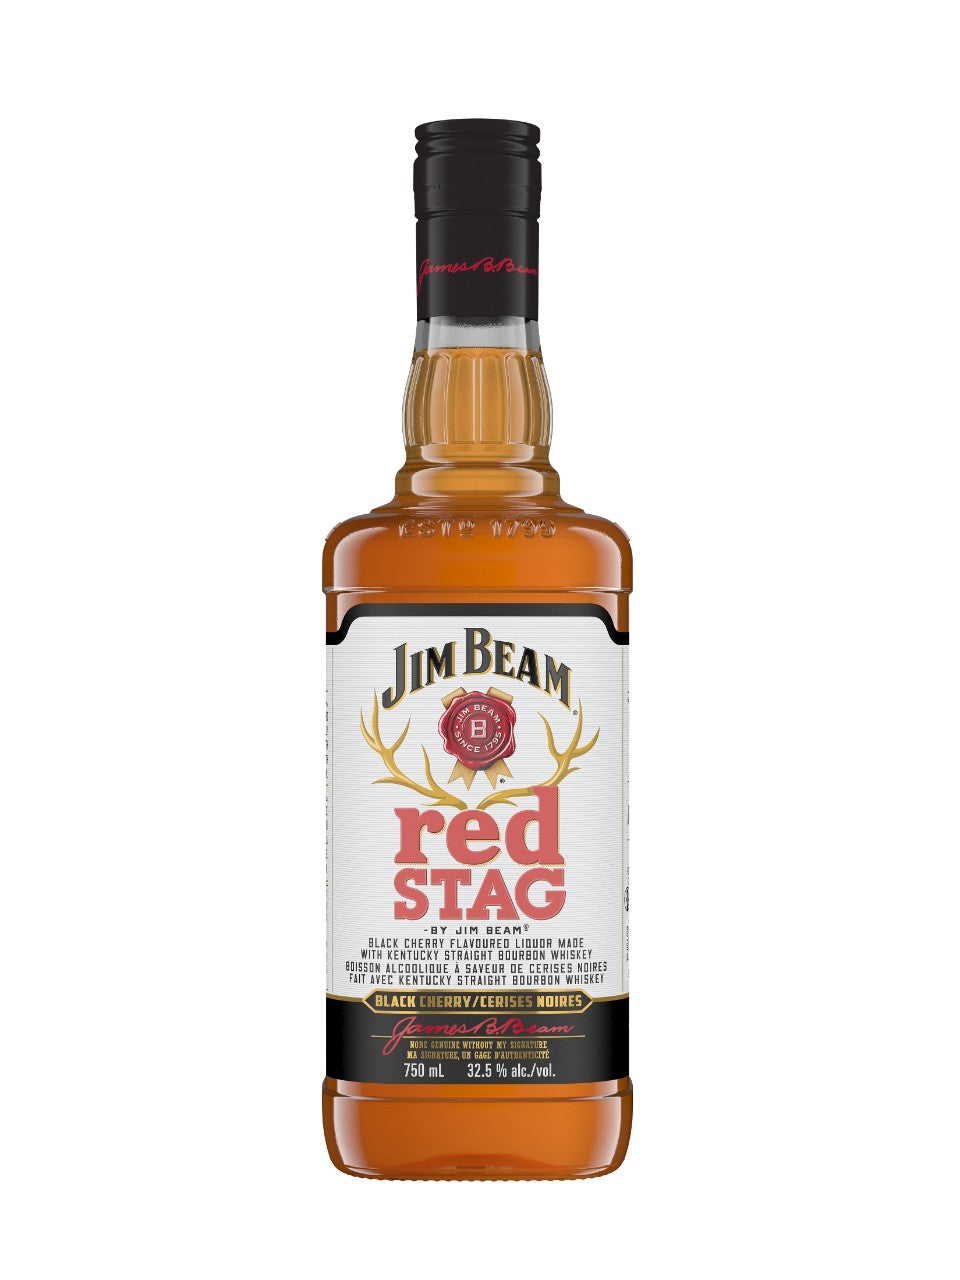 Jim Beam Red Stag 750 mL bottle